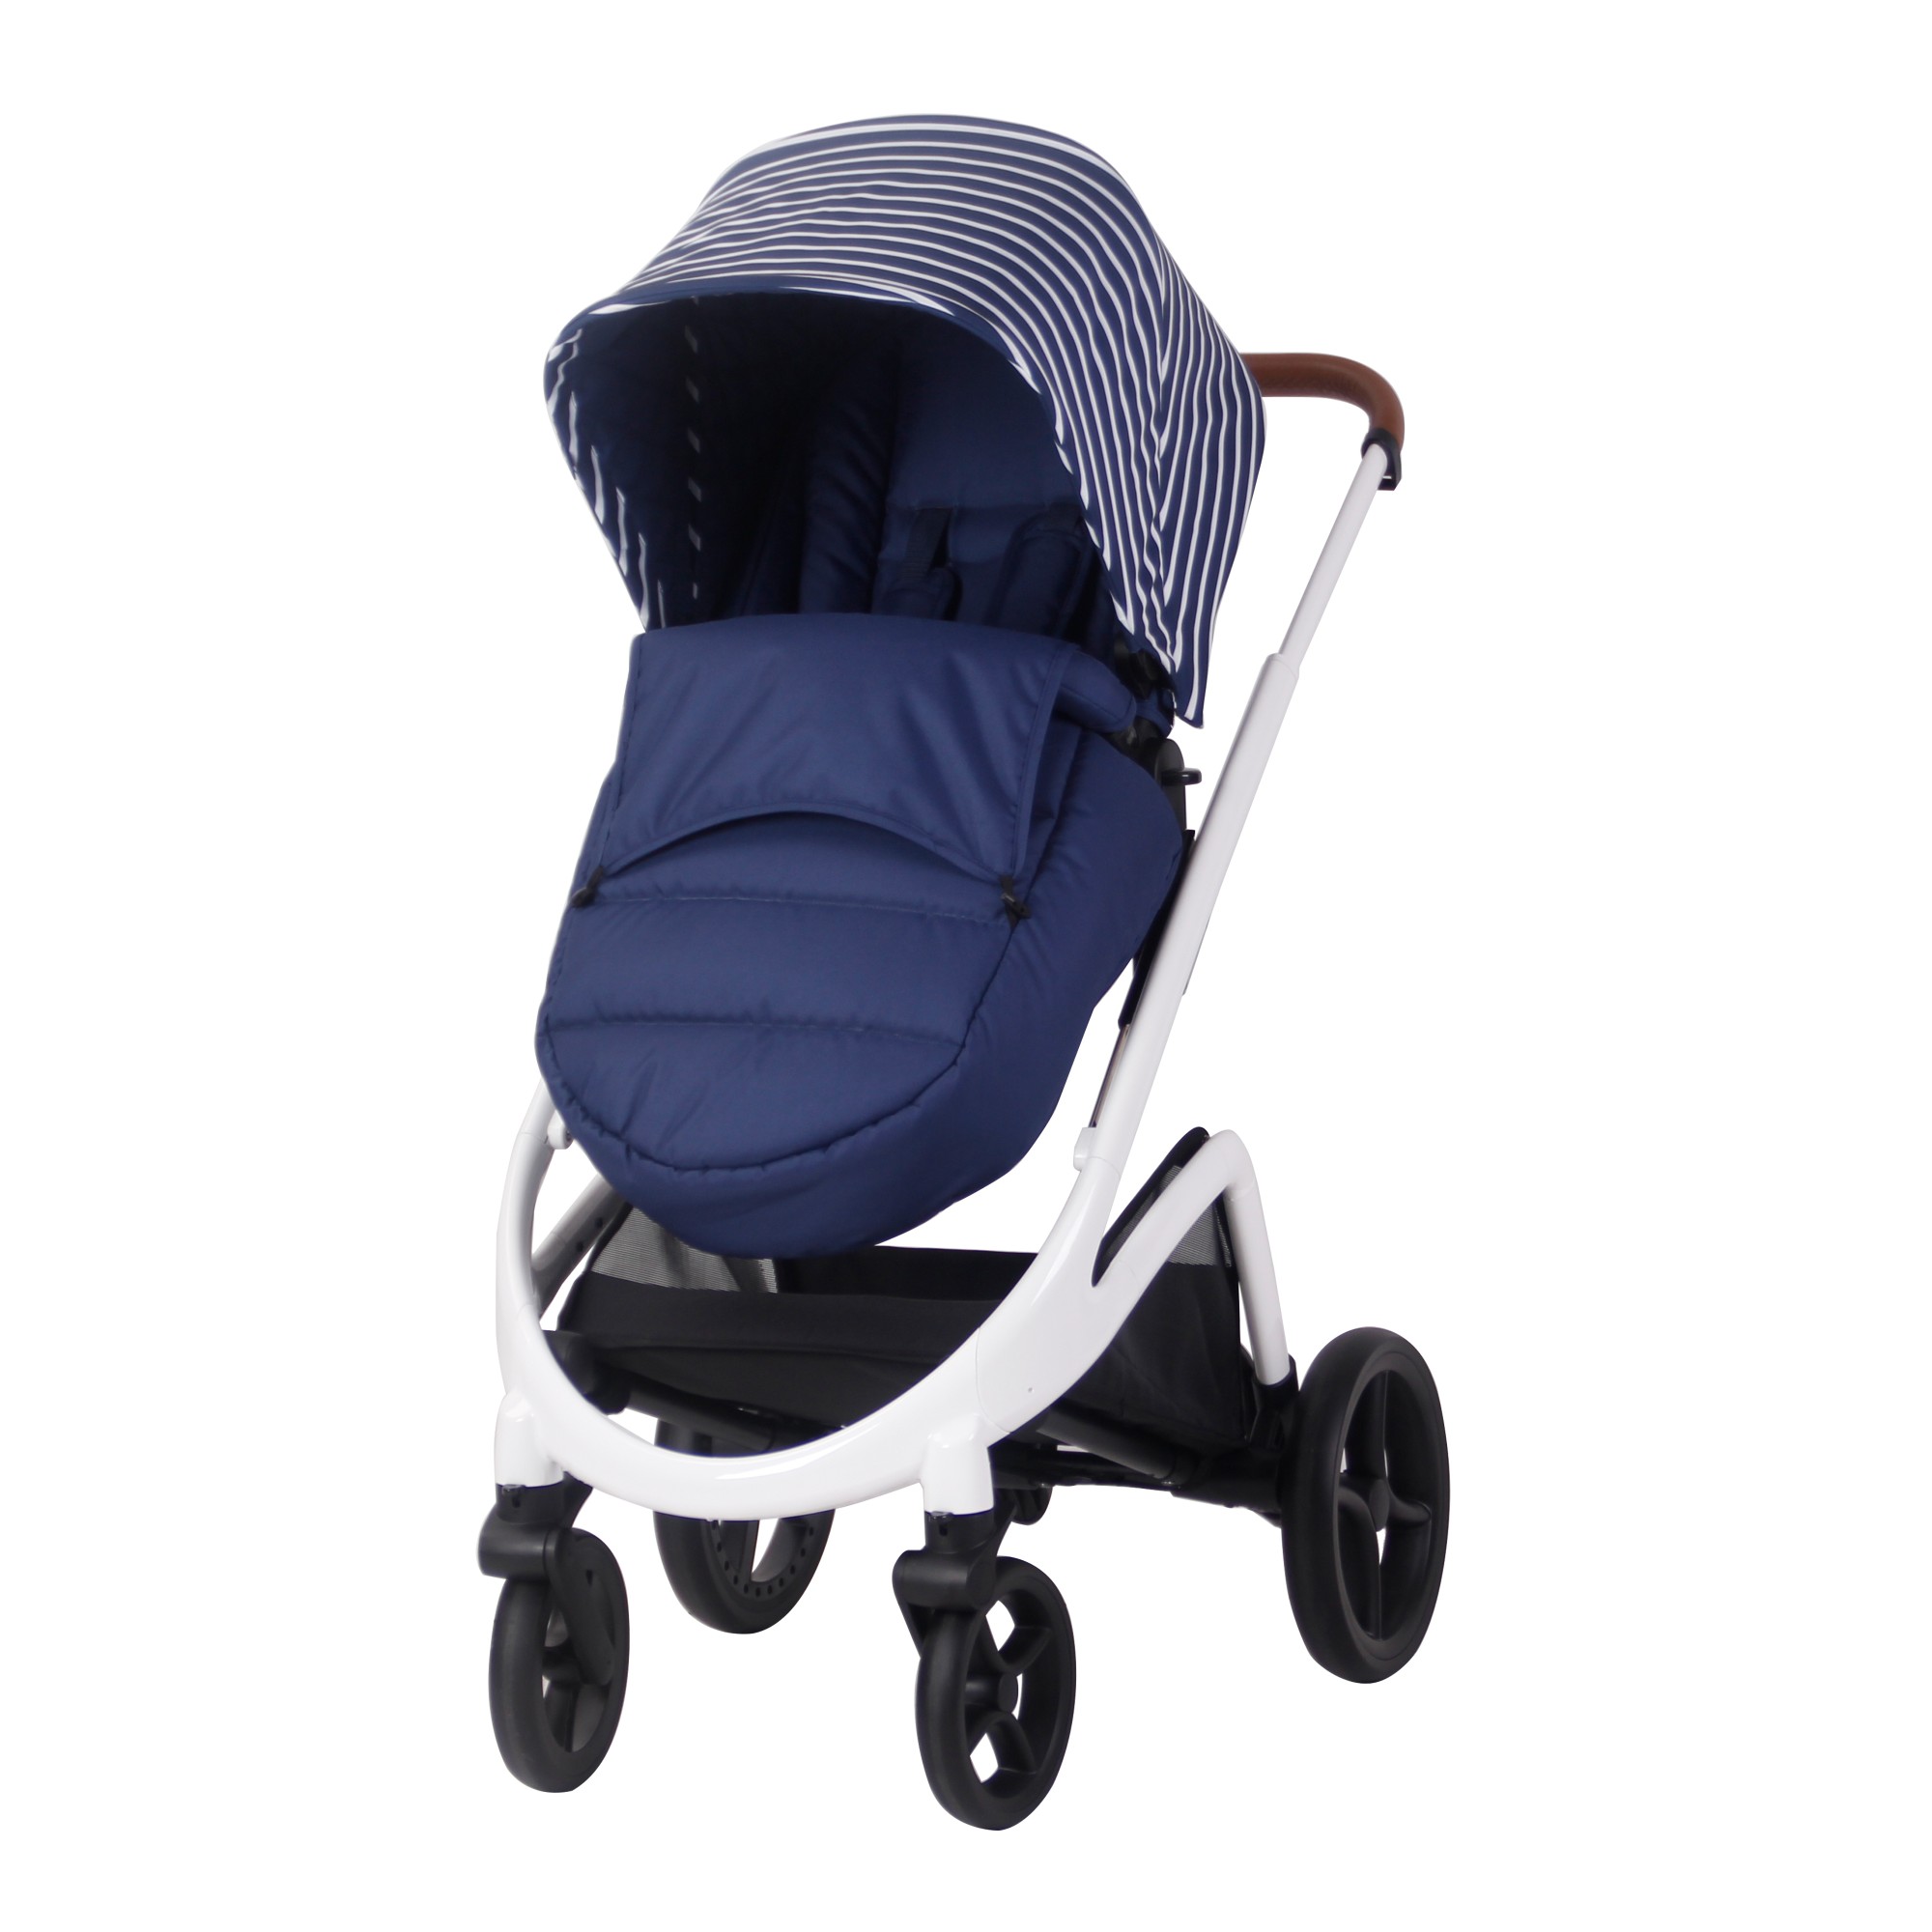 dreamiie by samantha faiers mb300 grey stripes travel system